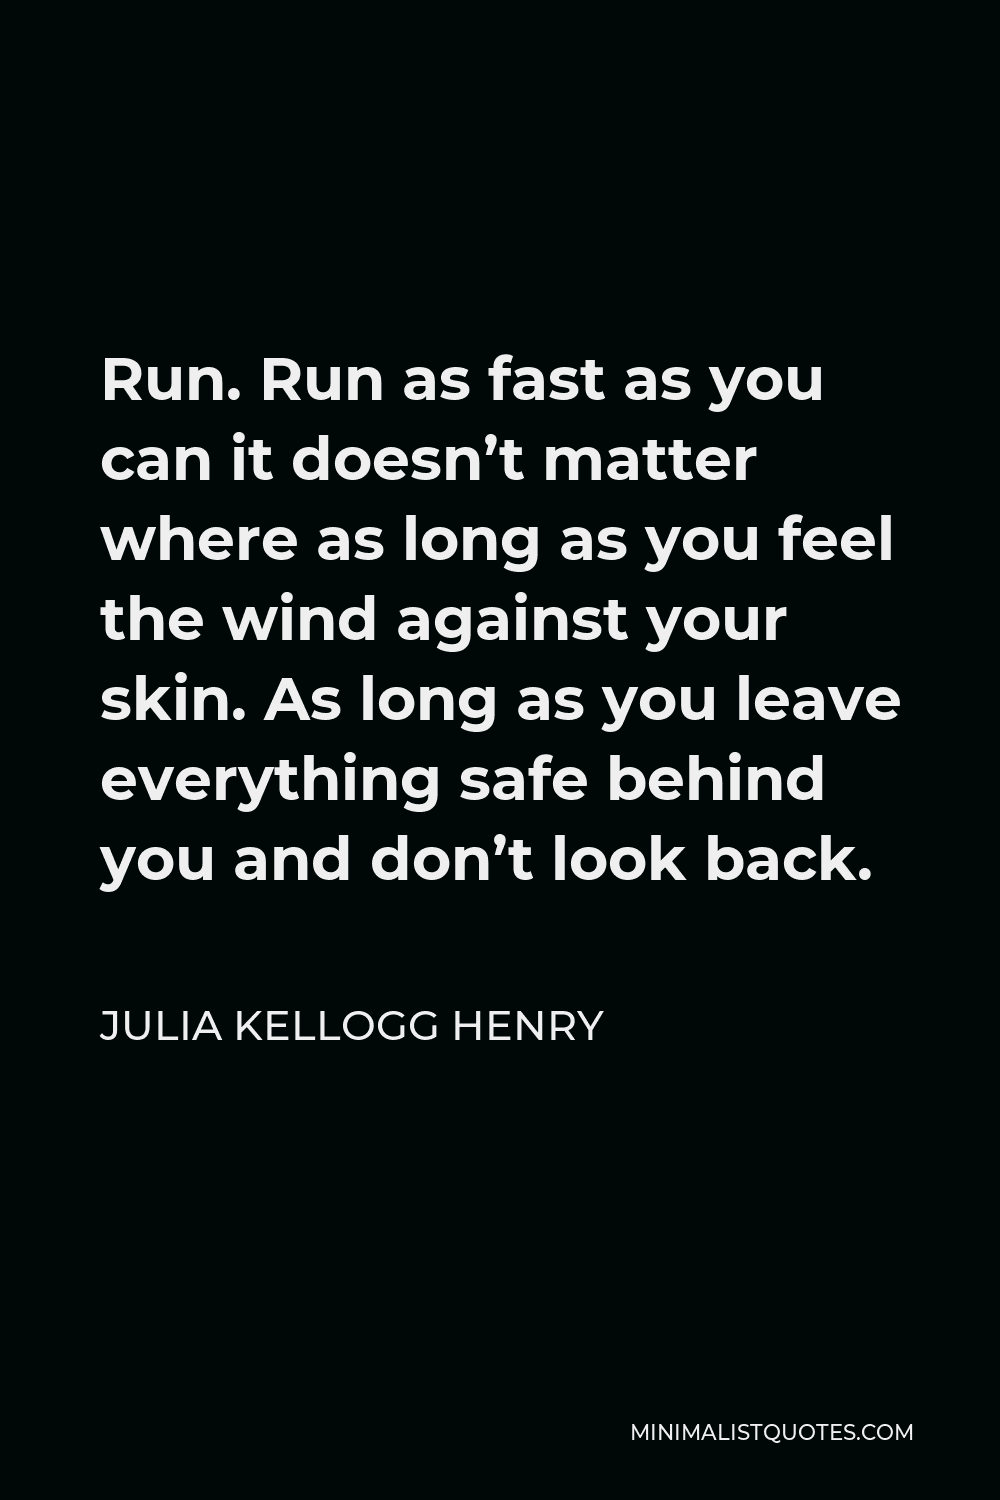 Julia Kellogg Henry Quote - Run. Run as fast as you can it doesn’t matter where as long as you feel the wind against your skin. As long as you leave everything safe behind you and don’t look back.